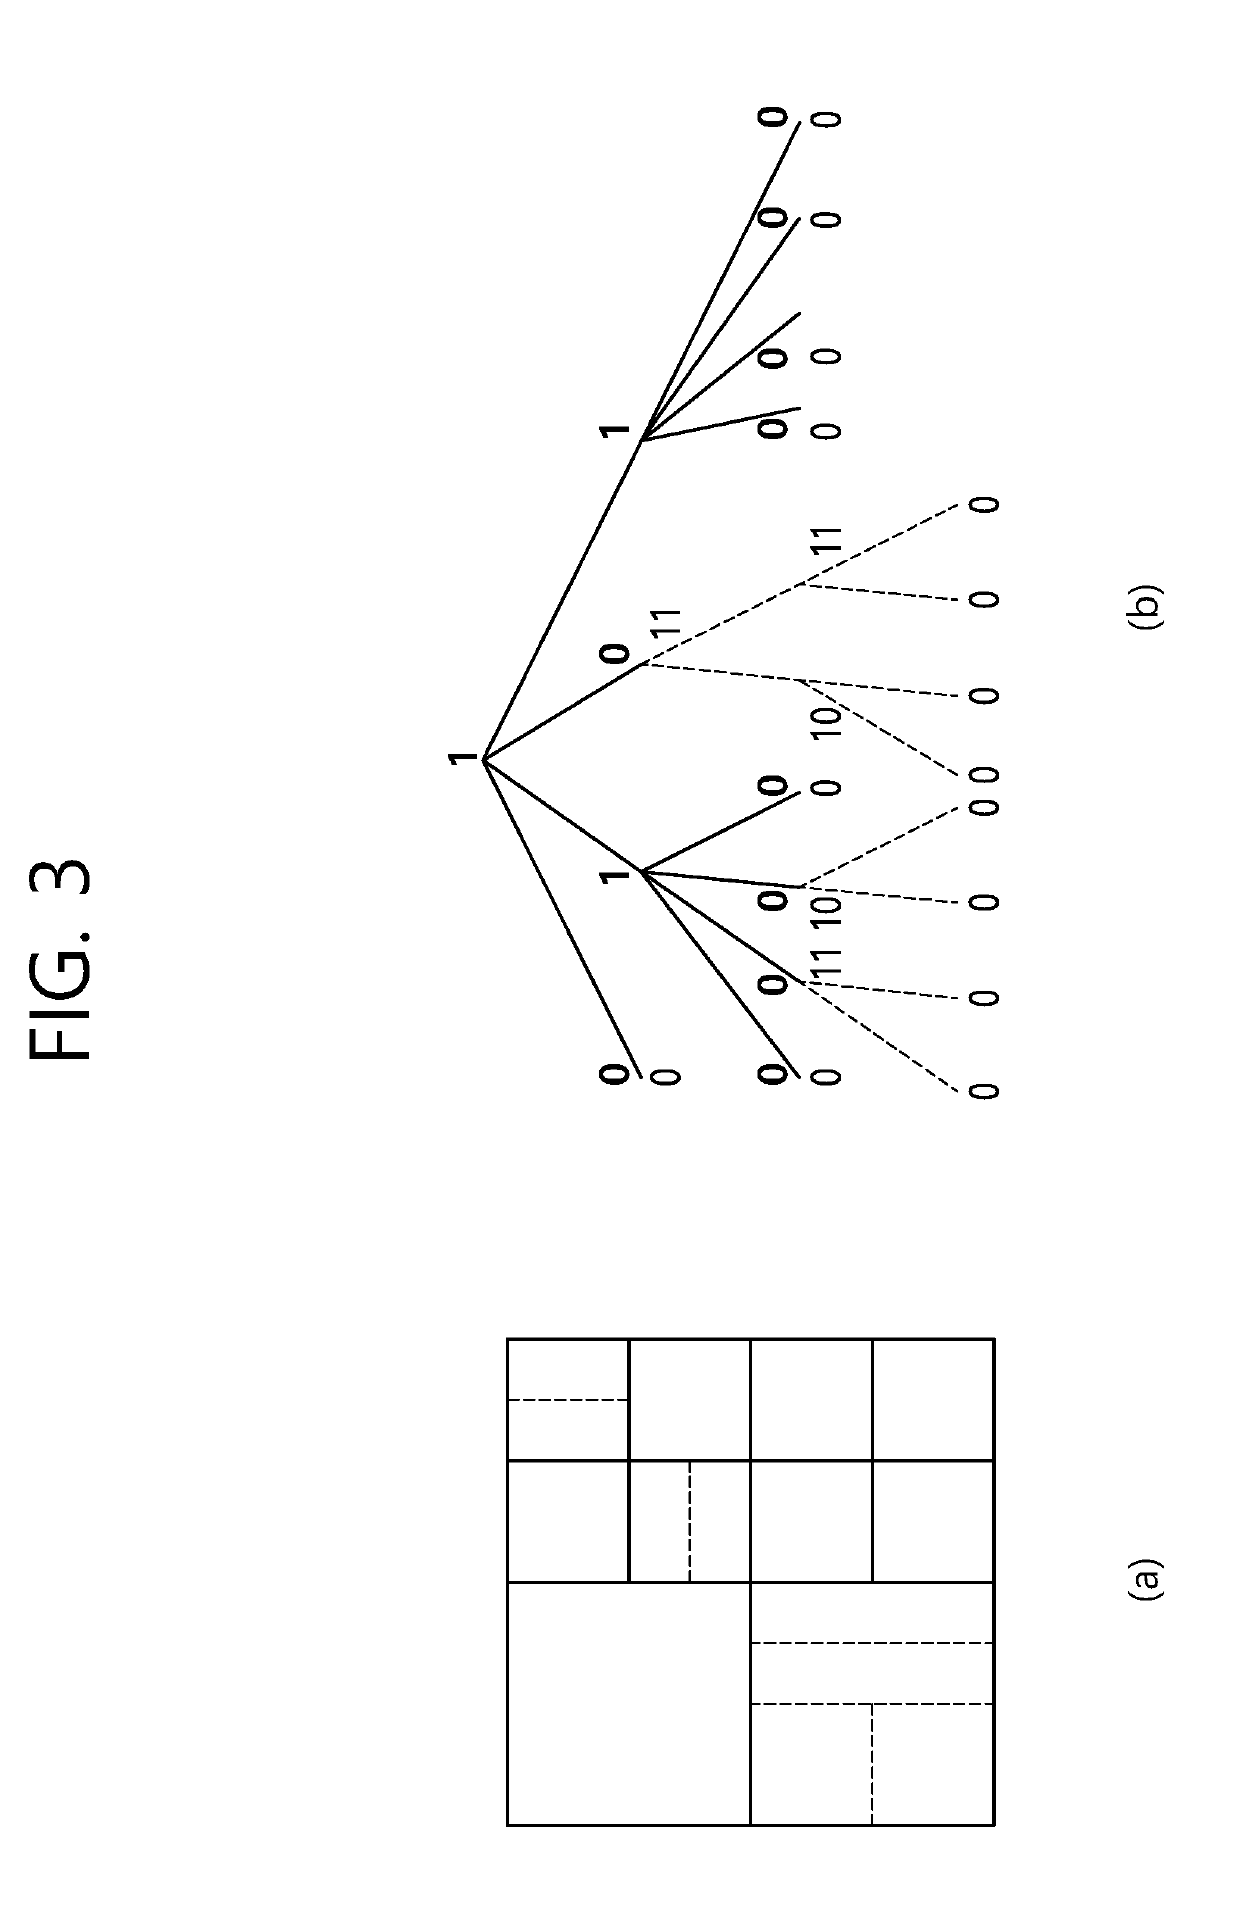 Illumination compensation-based inter-prediction method and apparatus in image coding system